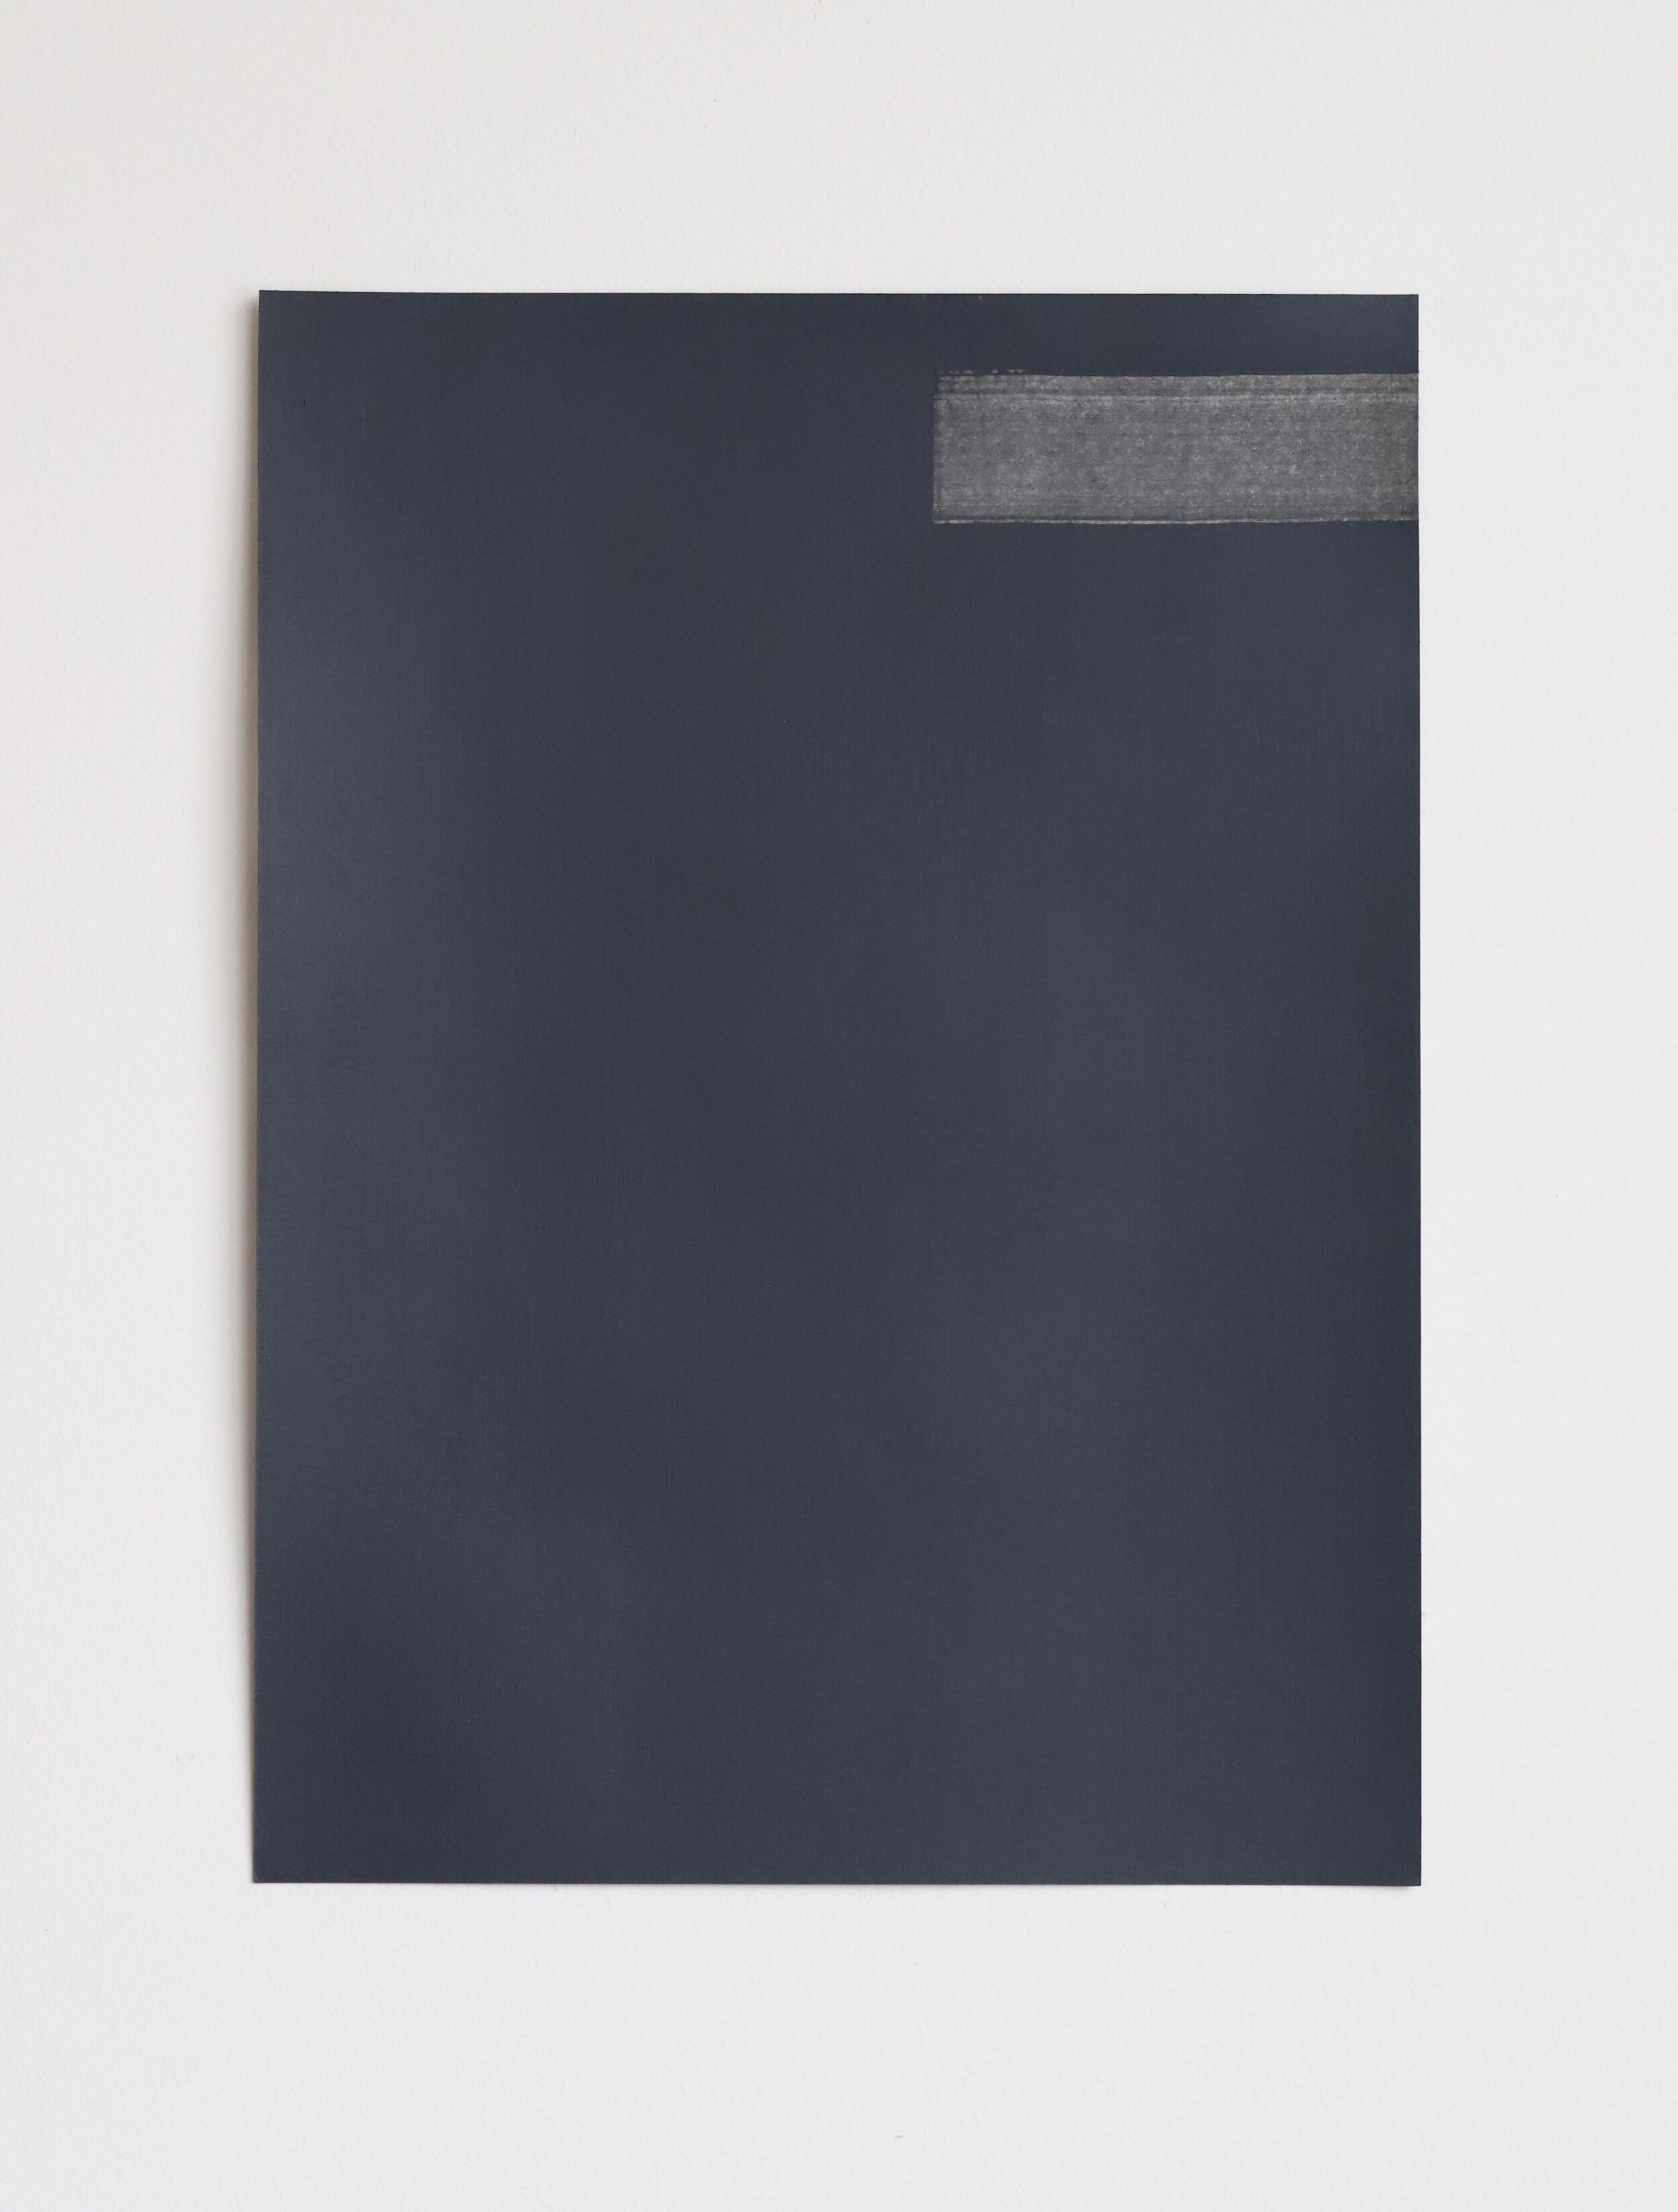  Untitled, gesso on paper, 38x28cm, 2020 